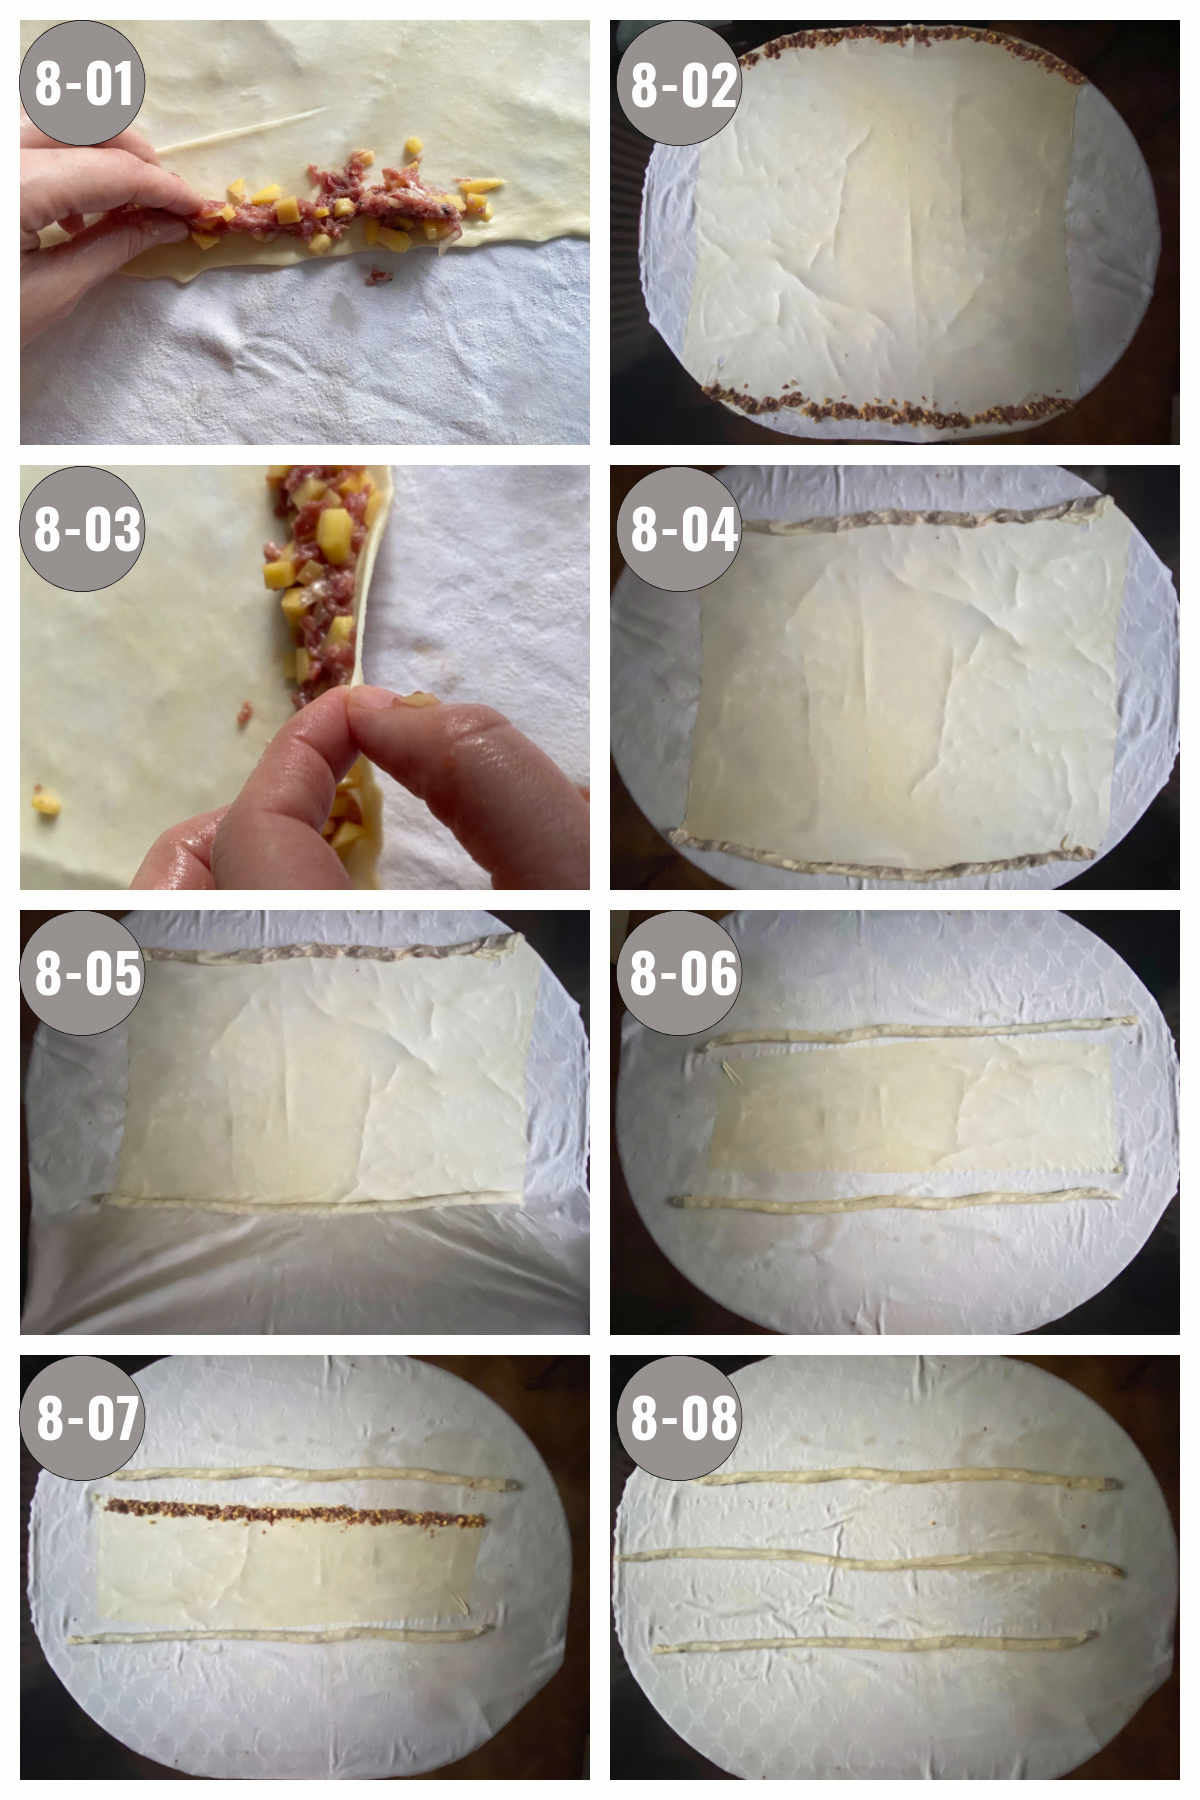 Eight photos (two by four) of the dough being stretched in a table and stuffed. 